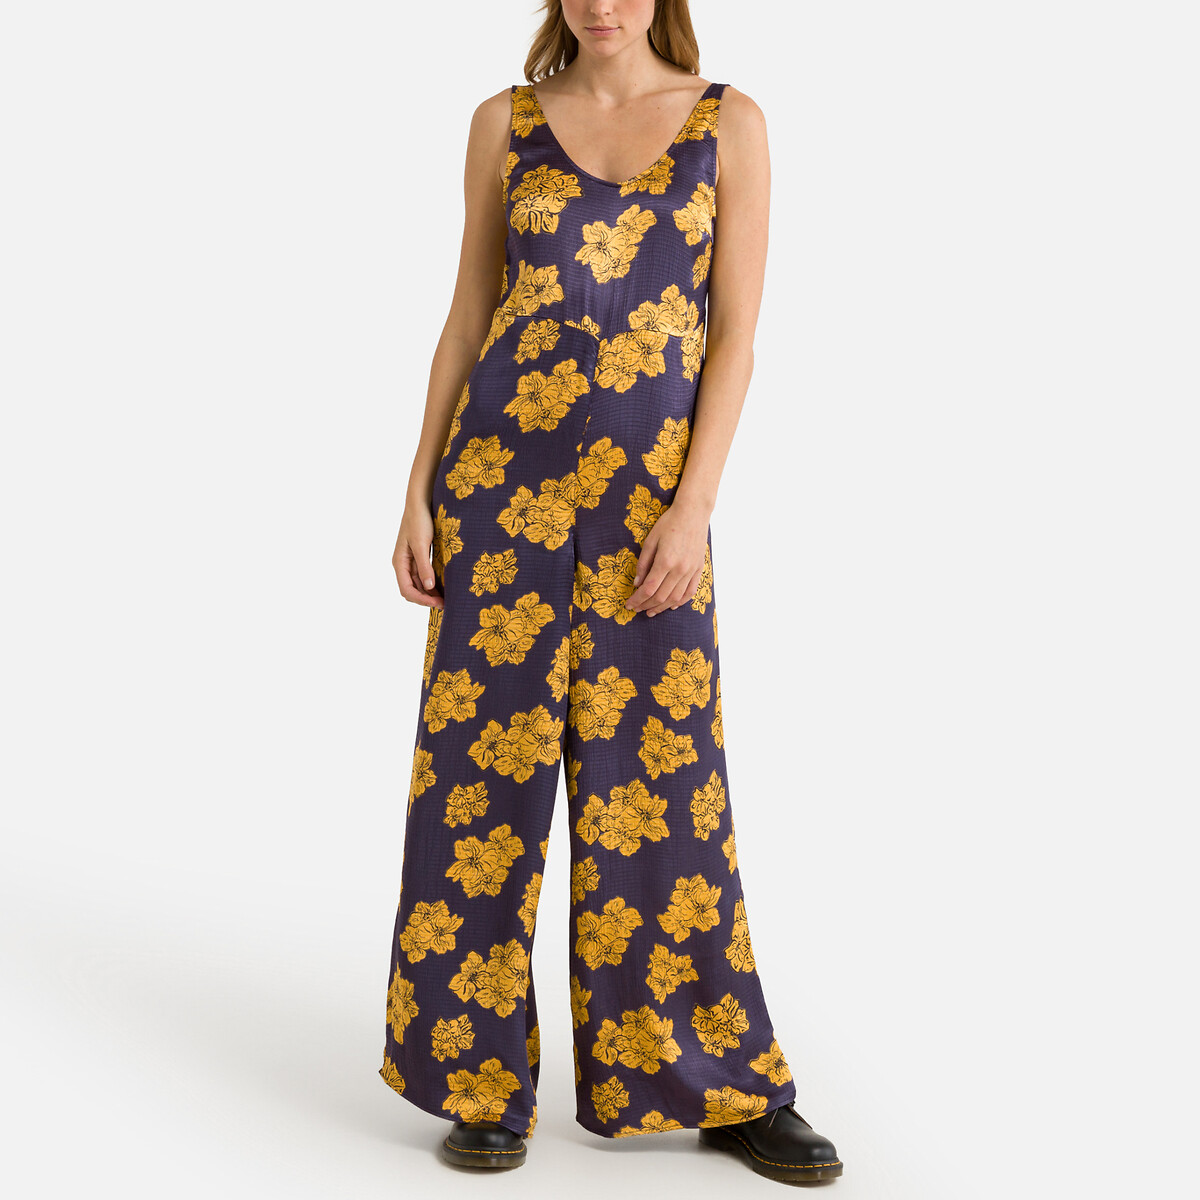 Shaning Floral Sleeveless Jumpsuit